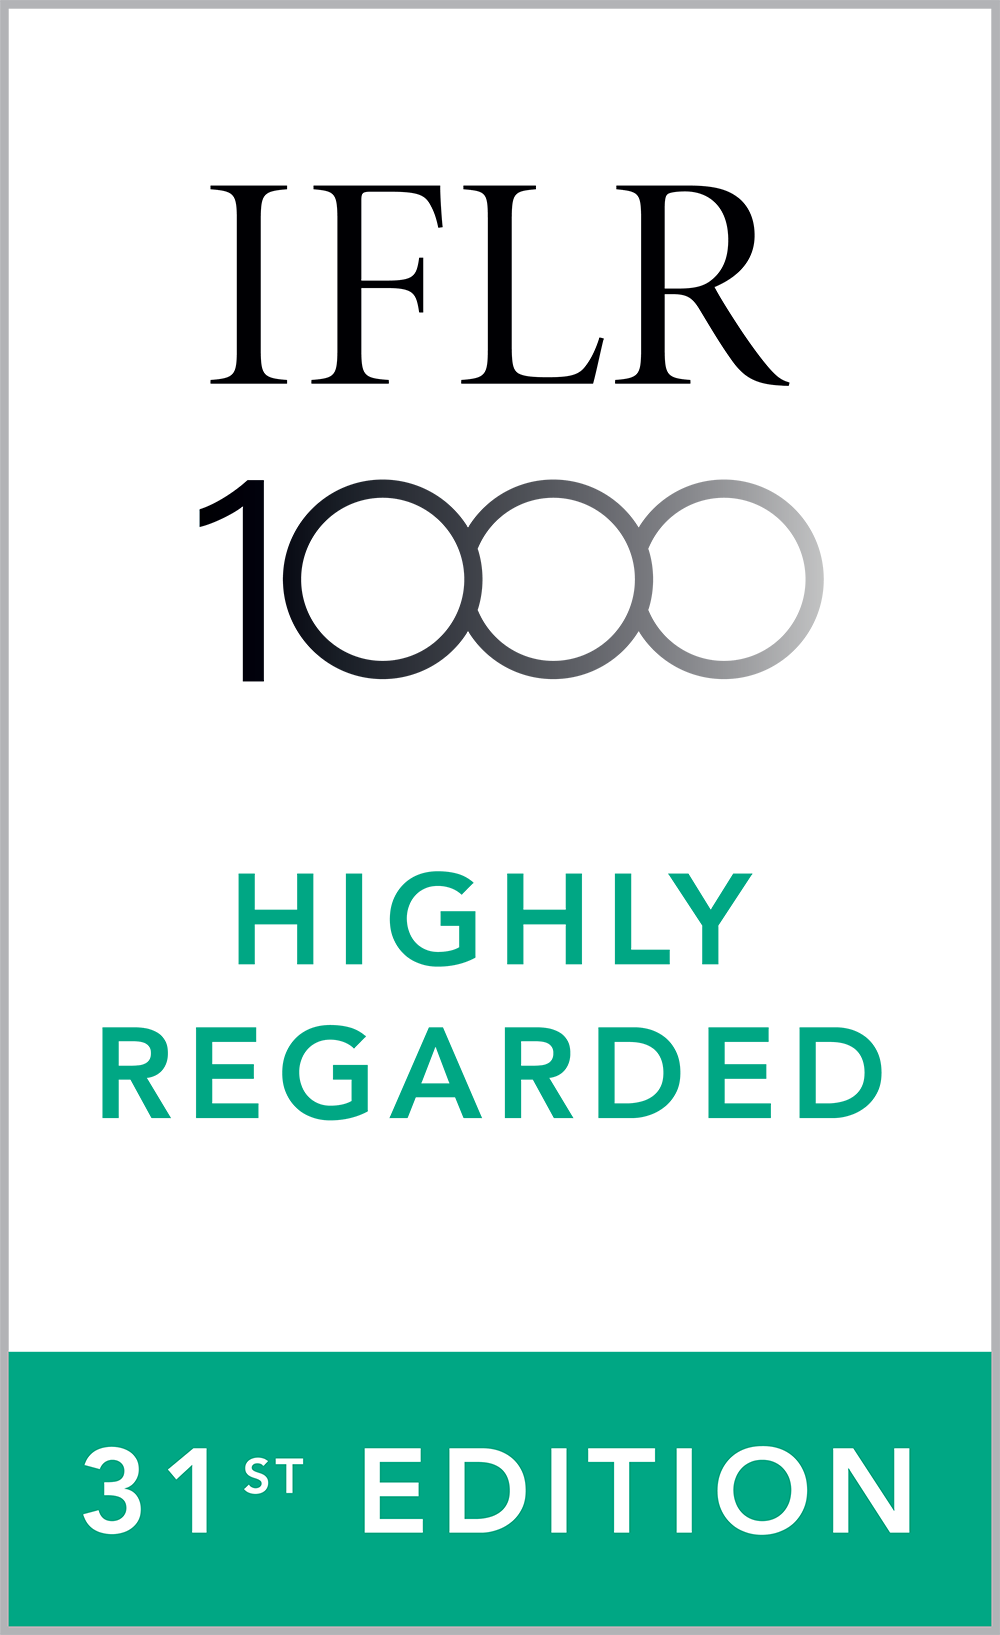 IFLR1000 Highly Regarded, 31st Edition (2021)